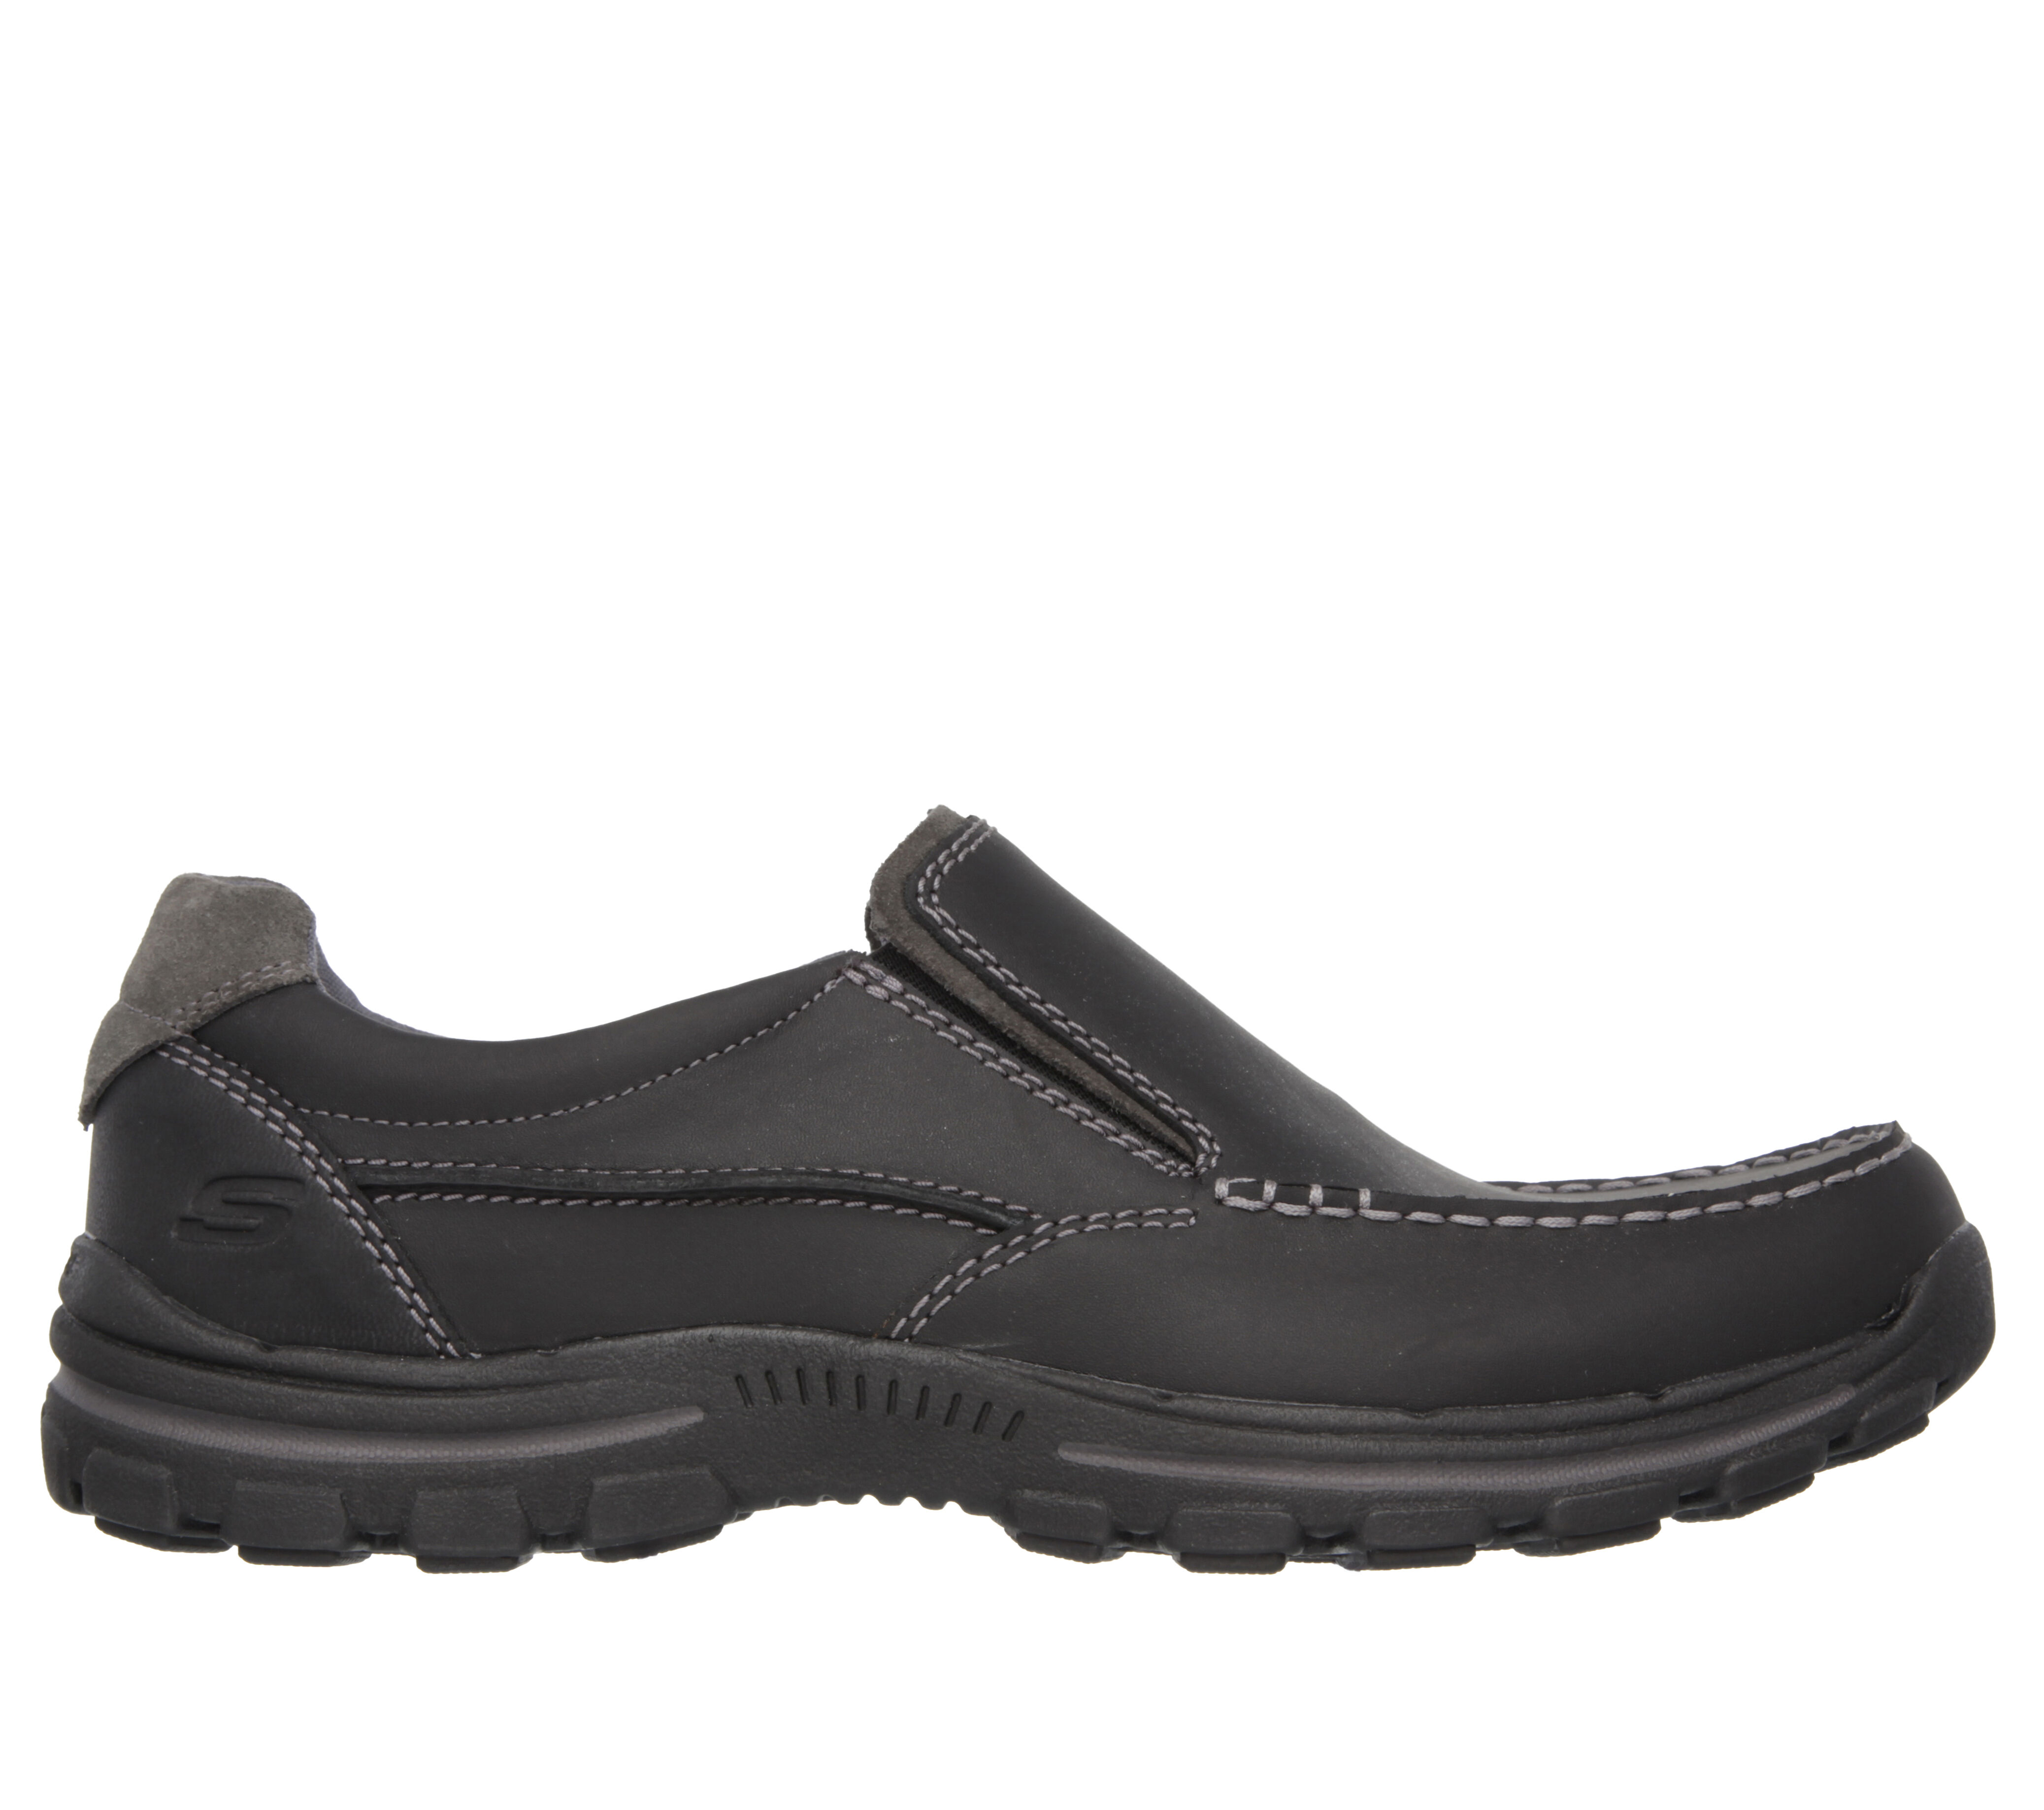 Relaxed Fit: Braver - Rayland | SKECHERS